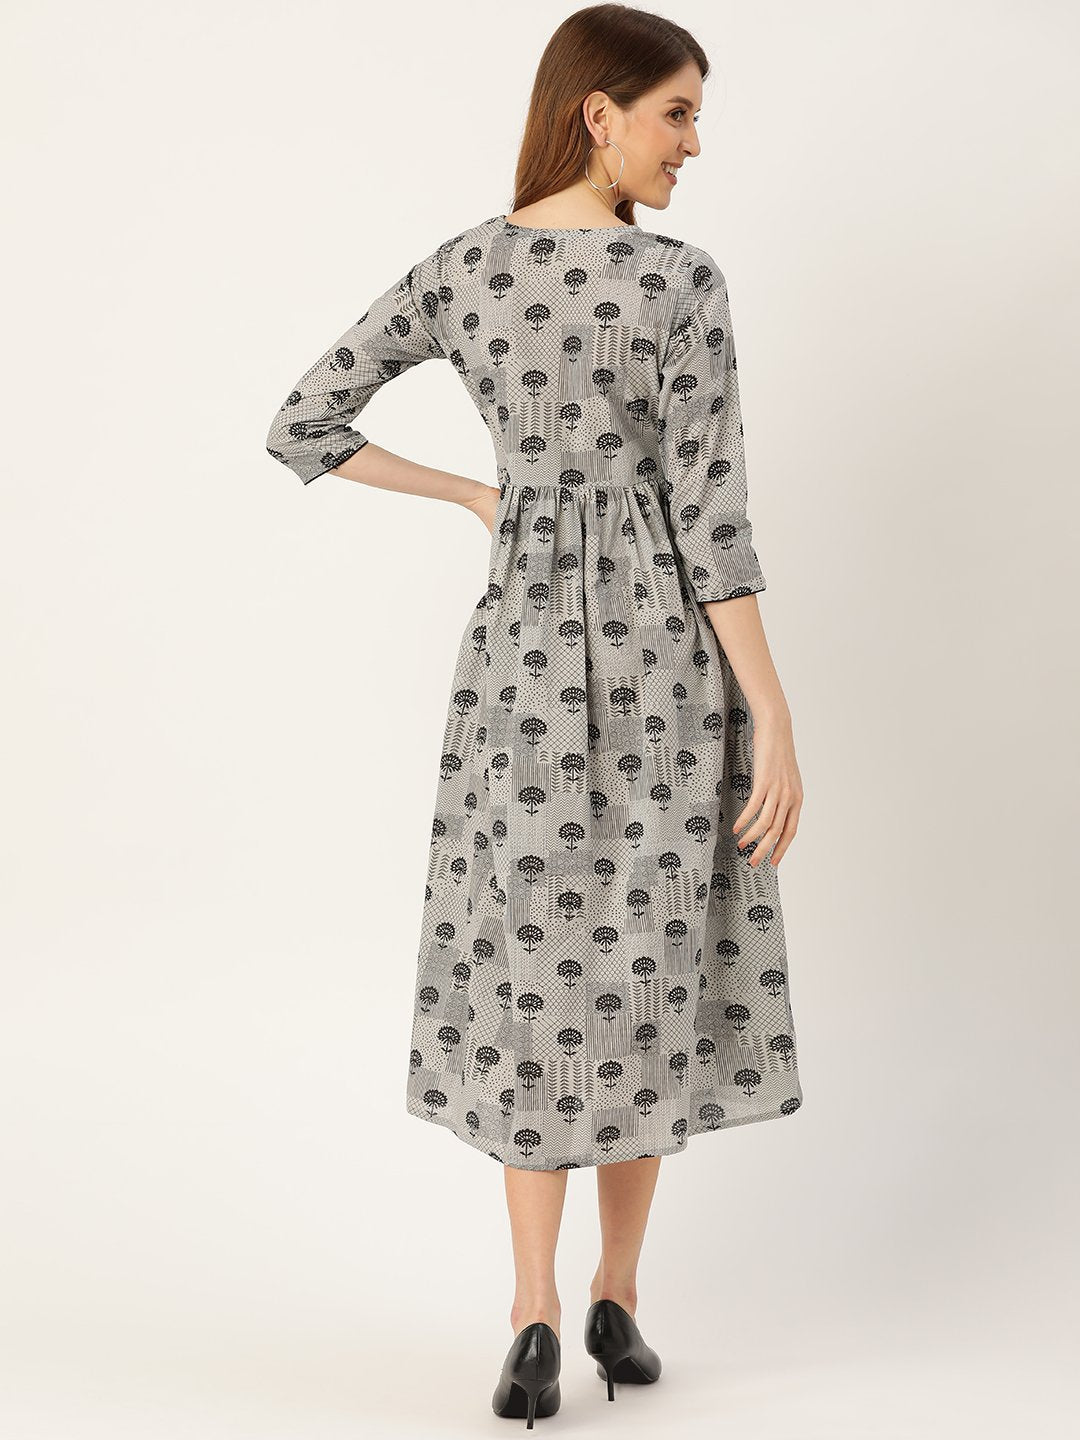 Women's Grey Floral Printed Round Neck Cotton A-Line Dress - Nayo Clothing